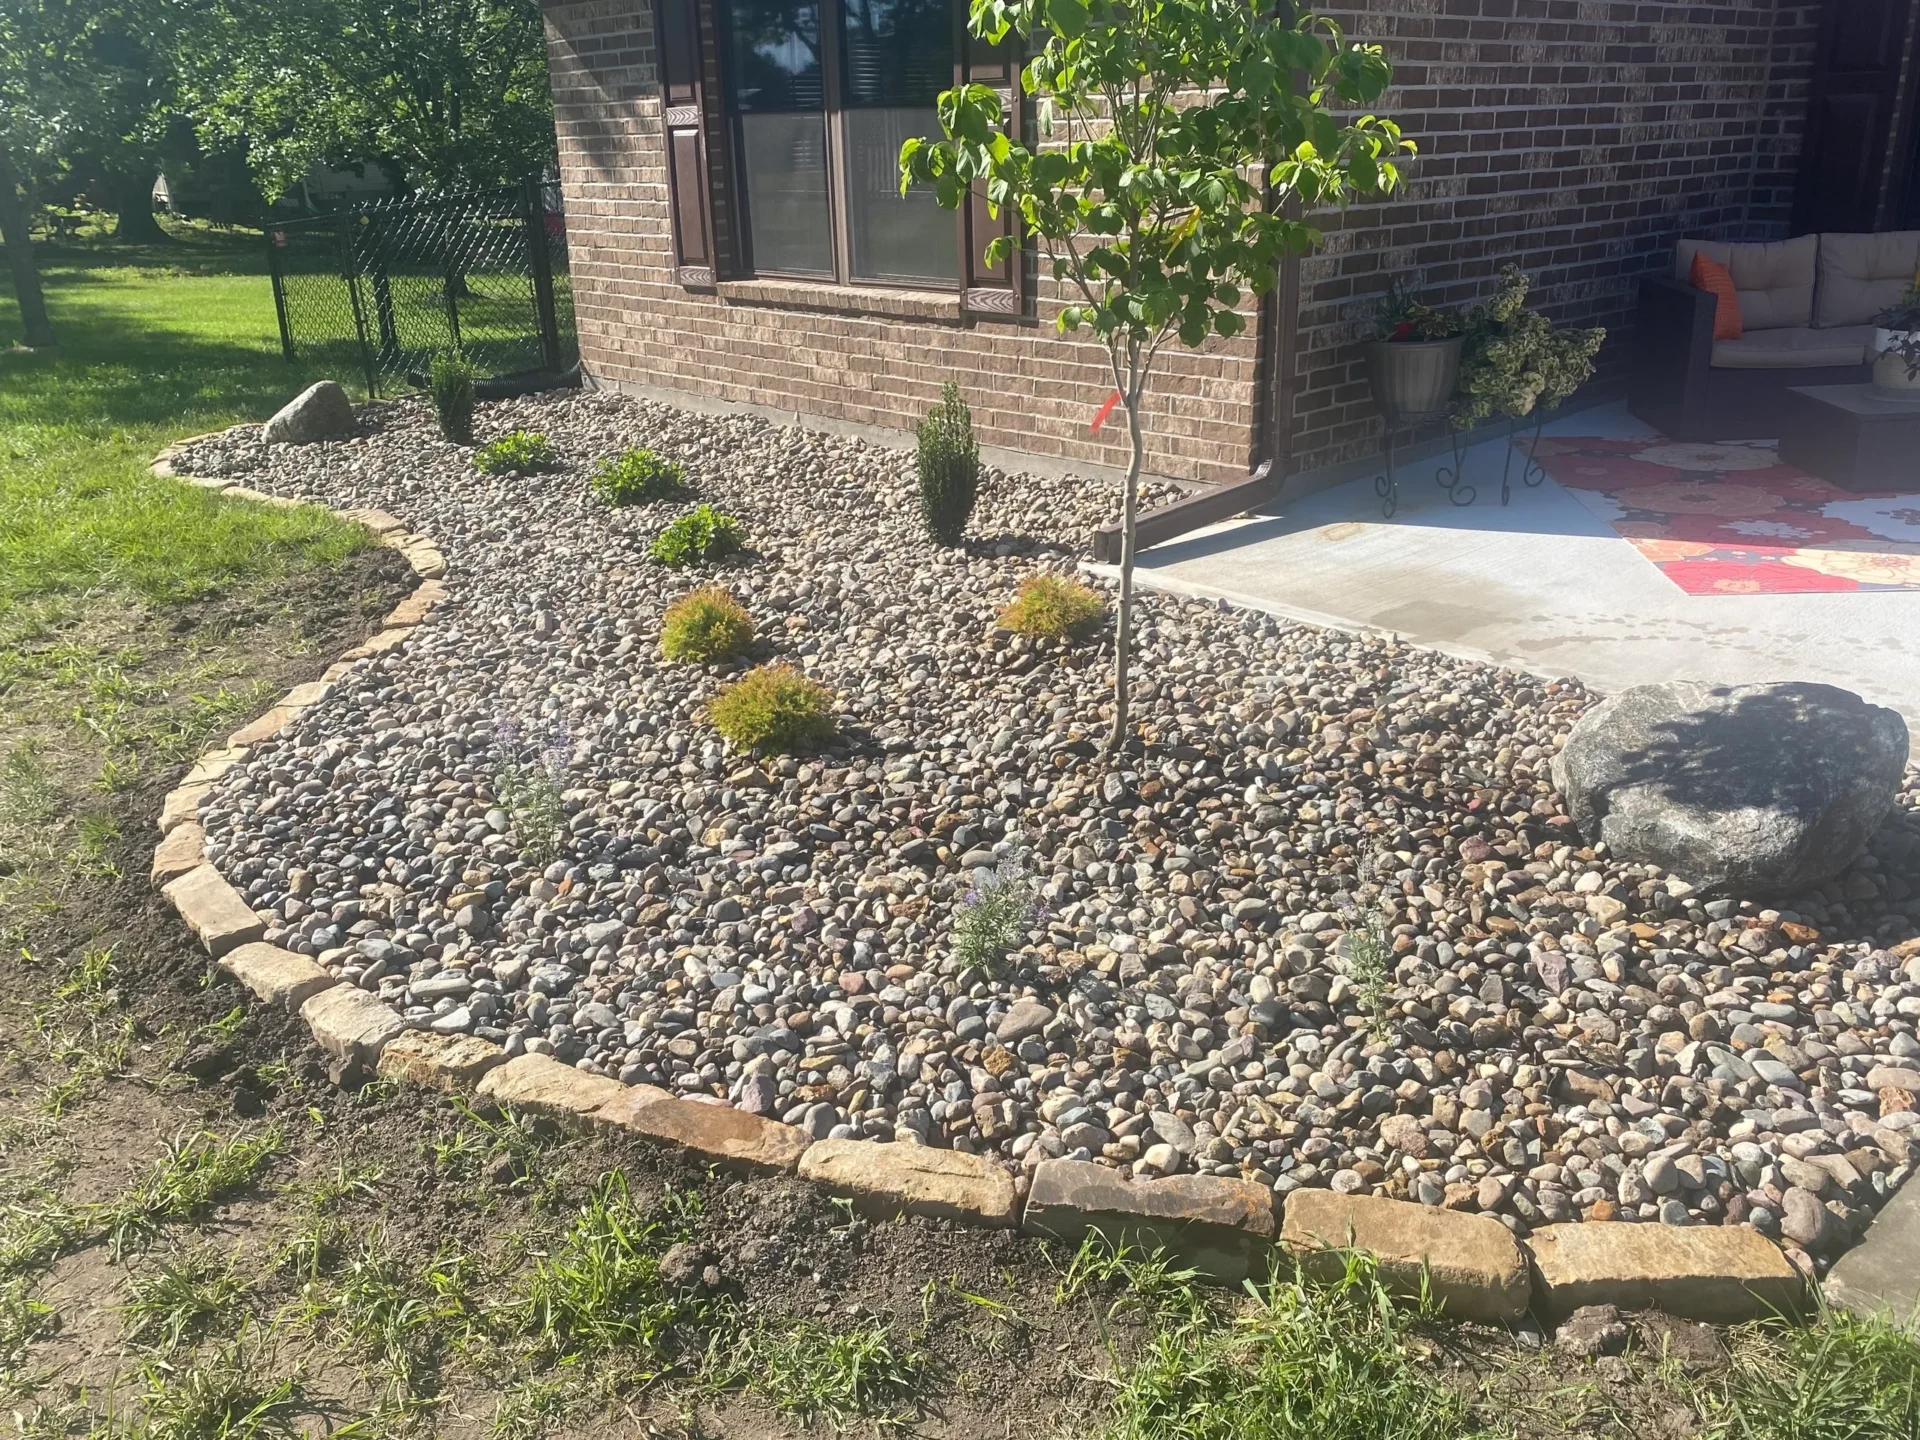 A yard with rocks and plants in it